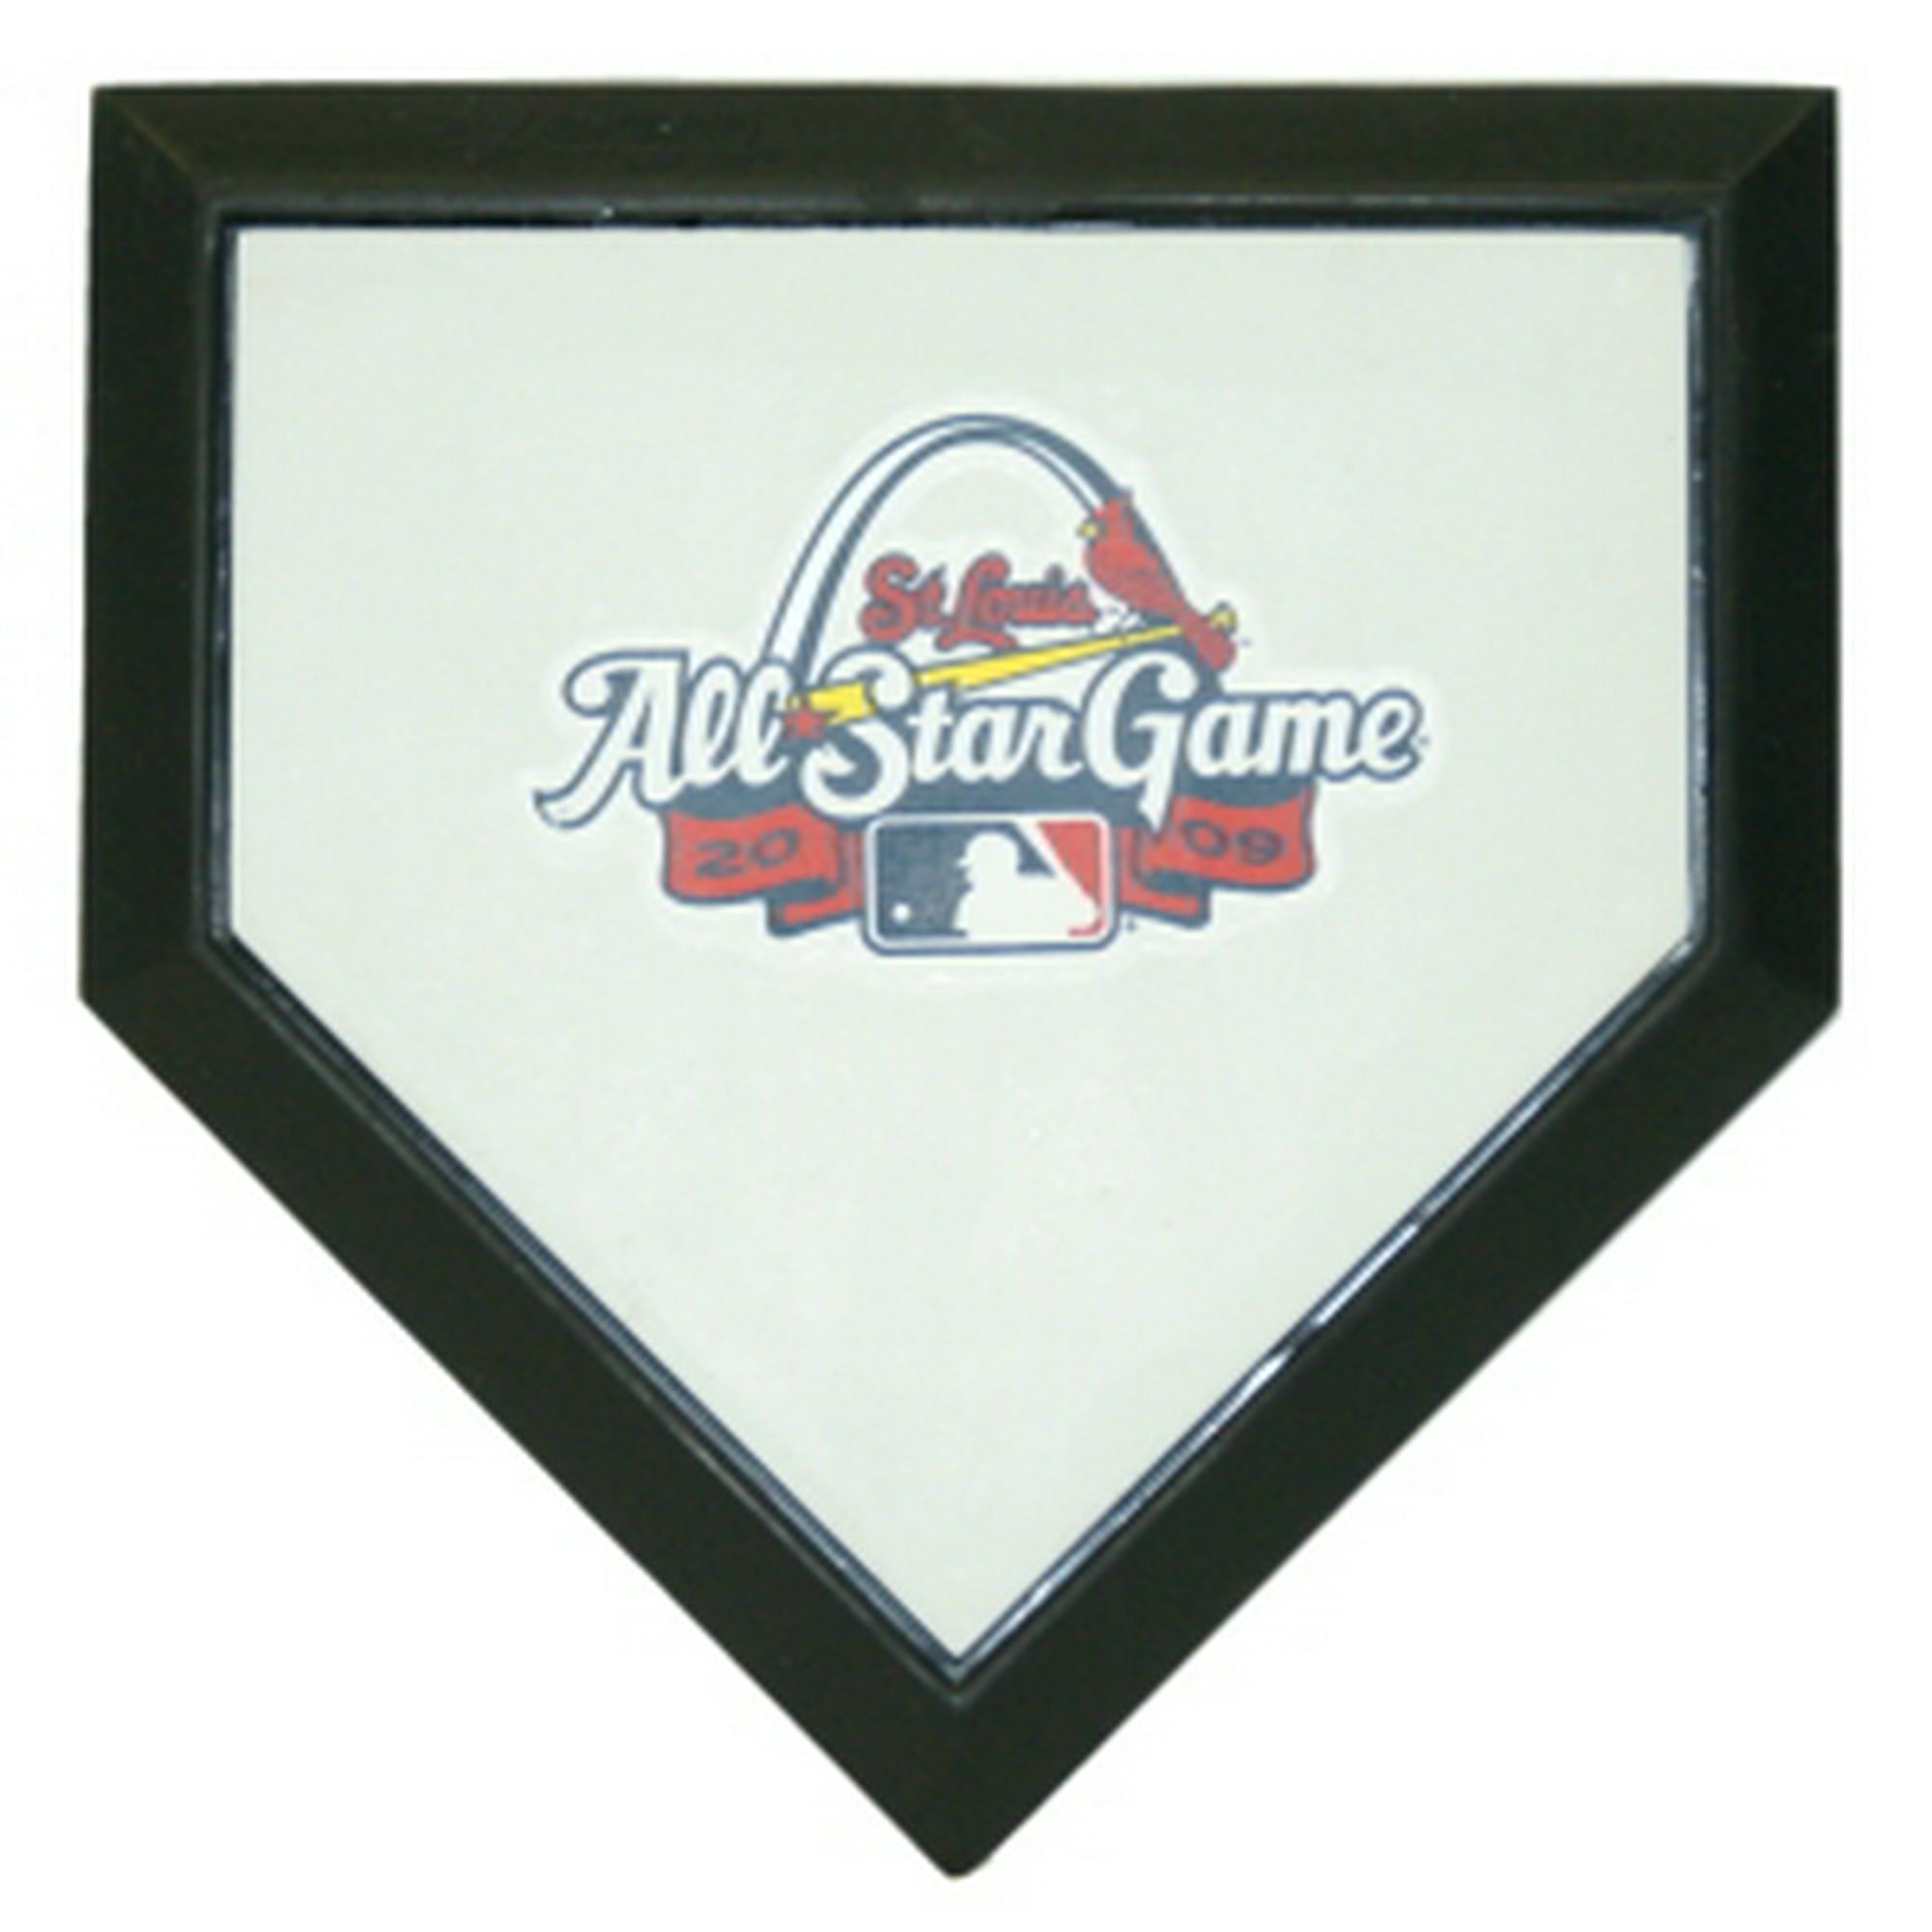 2009 Mlb All-star Game Authentic Hollywood Pocket Home Plate